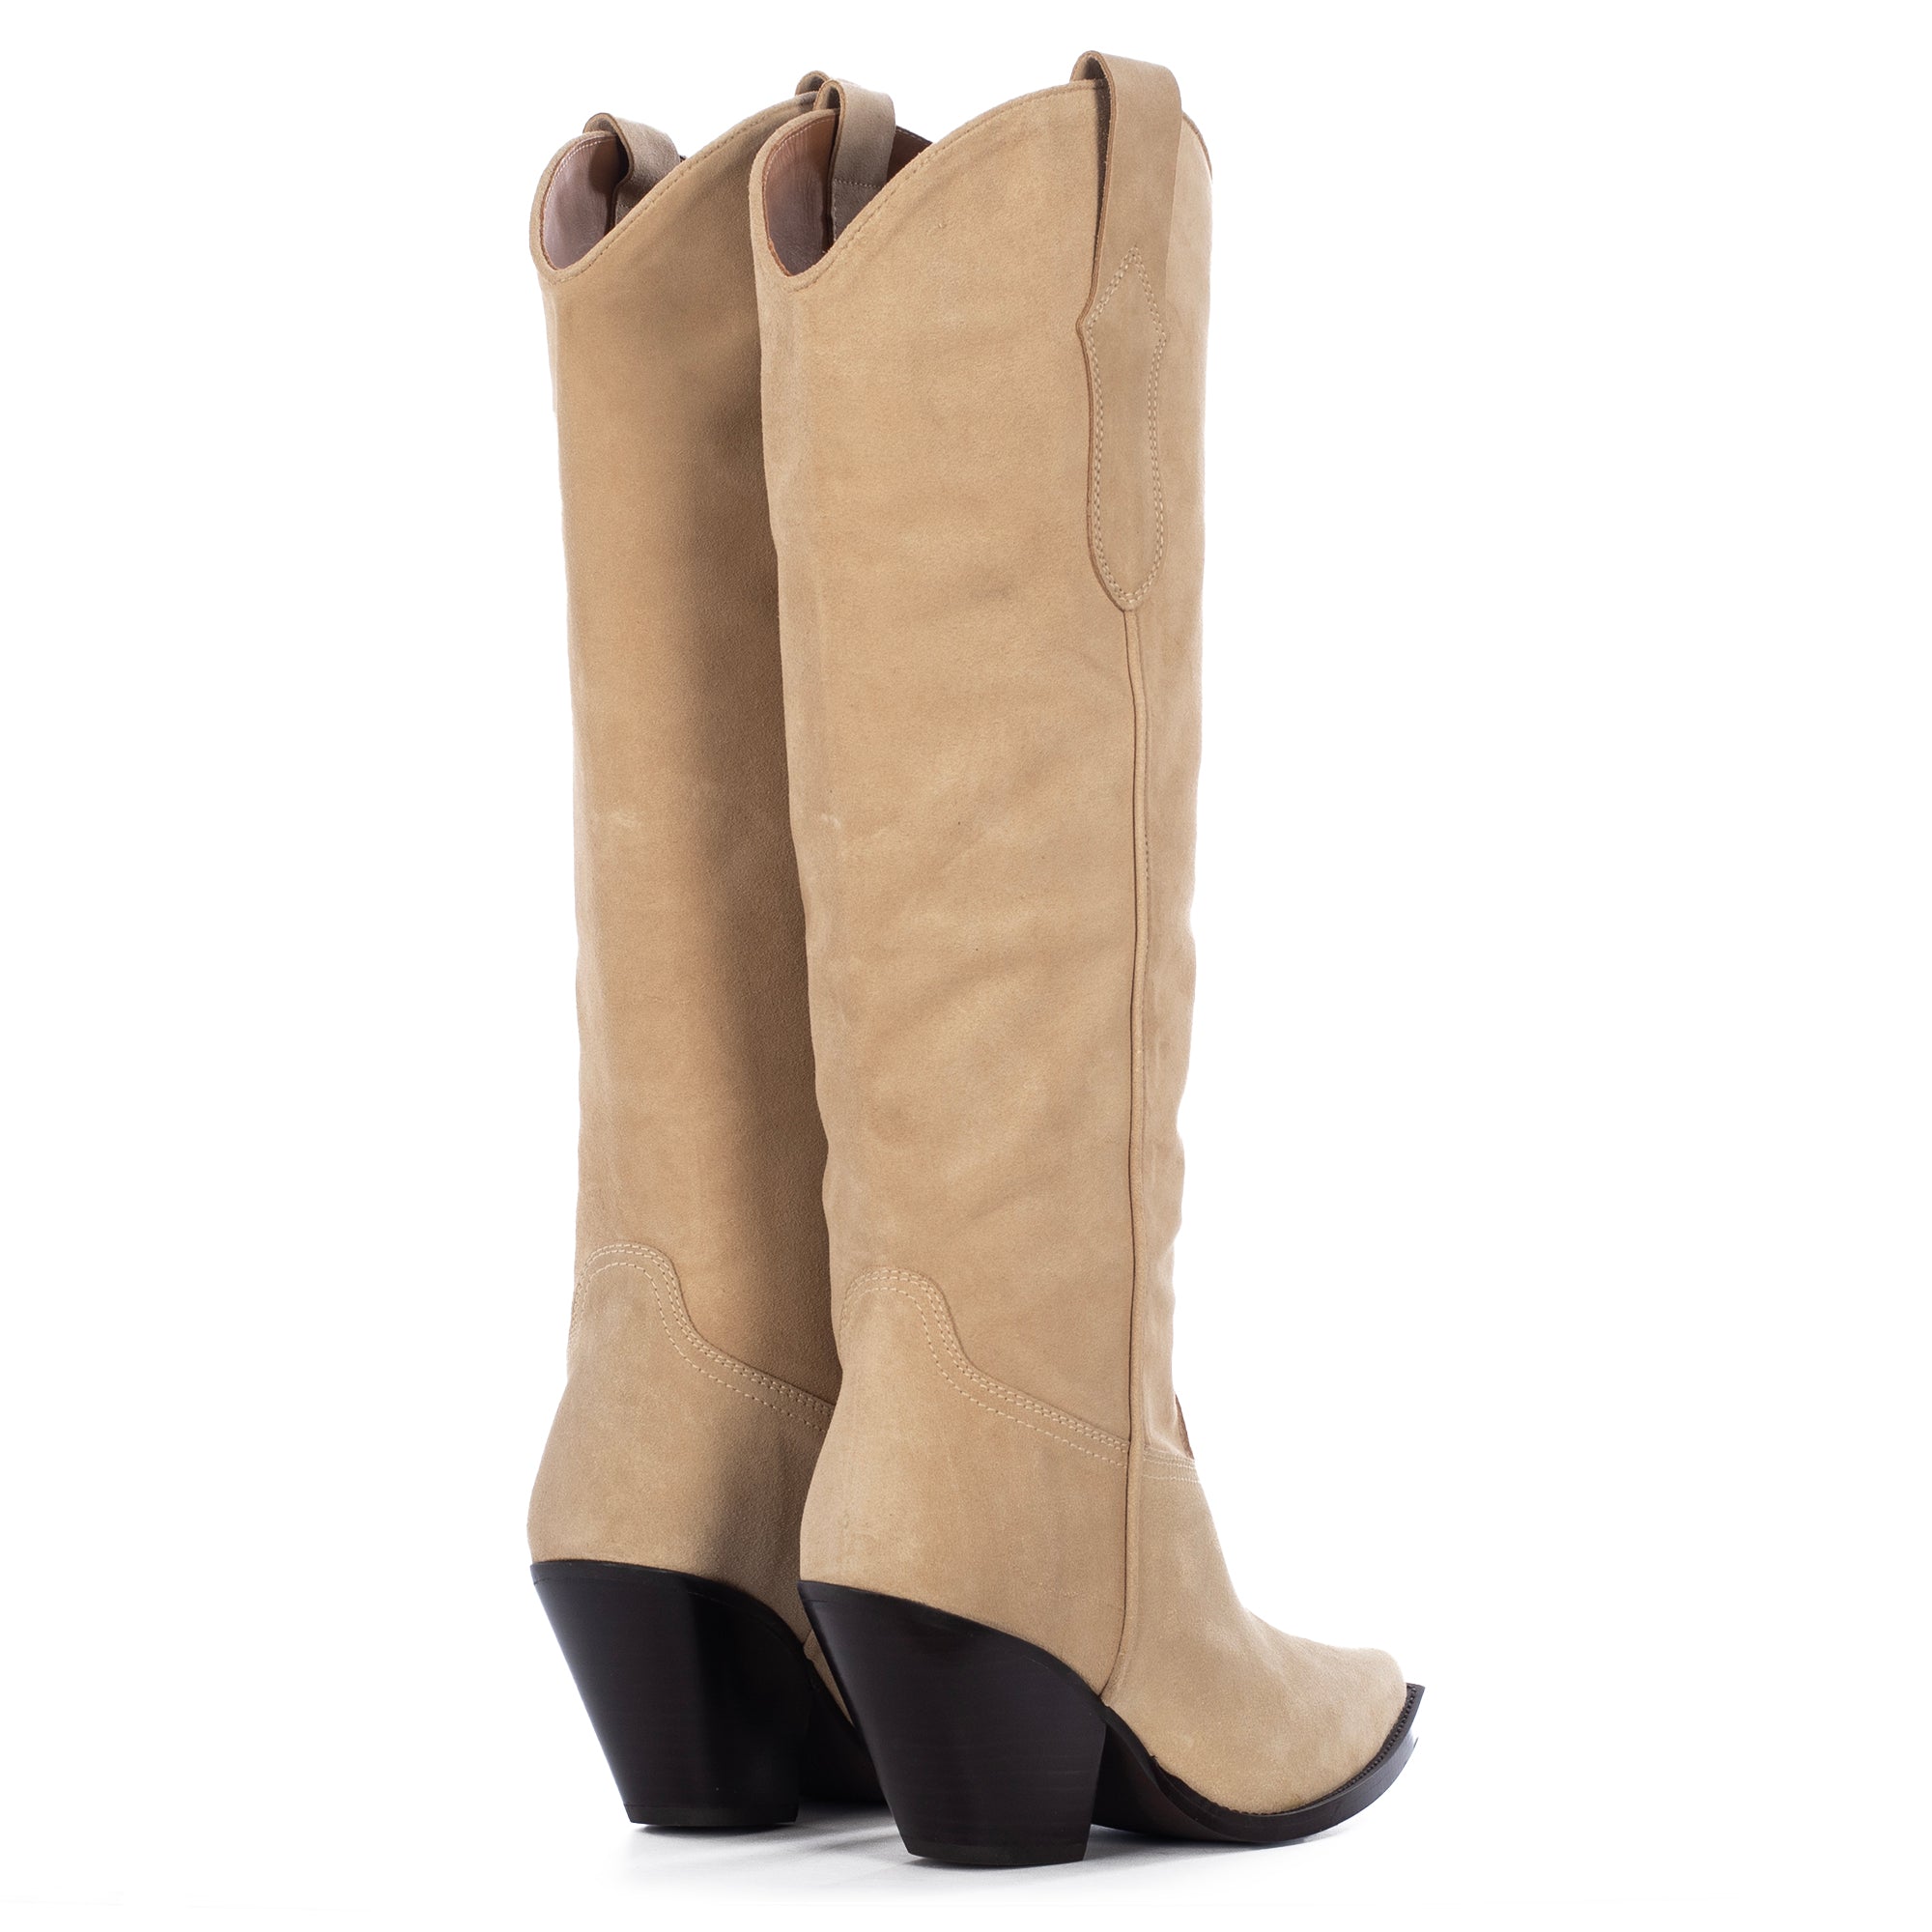 SAND SUEDE TALL BOOTS